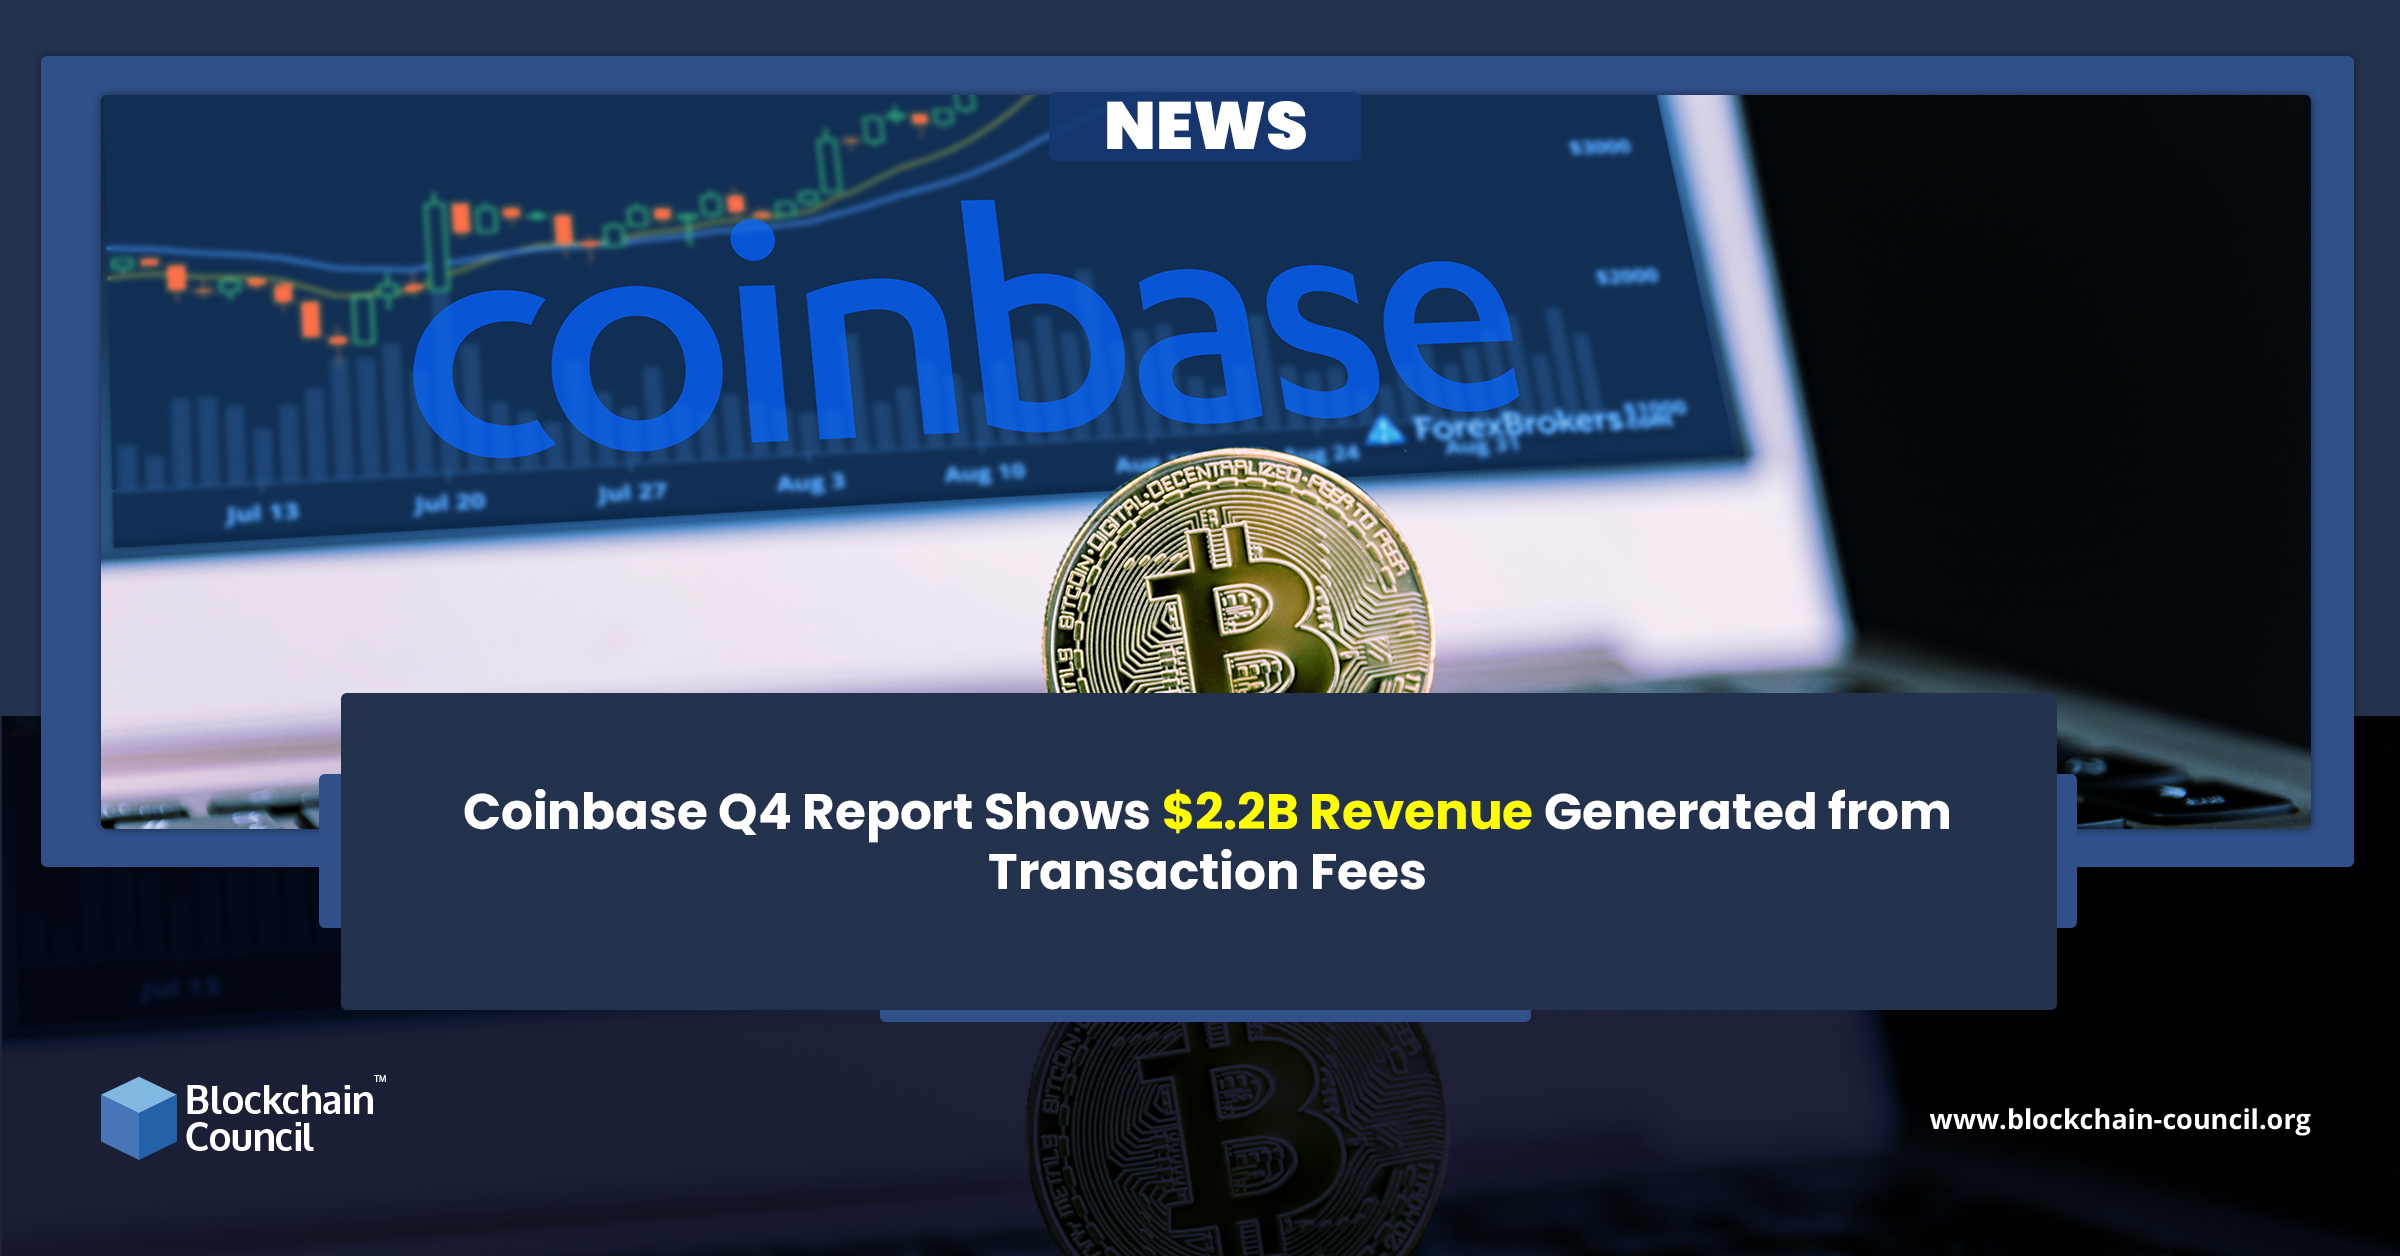 Coinbase Q4 Report Shows $2.2B Revenue Generated from Transaction Fees